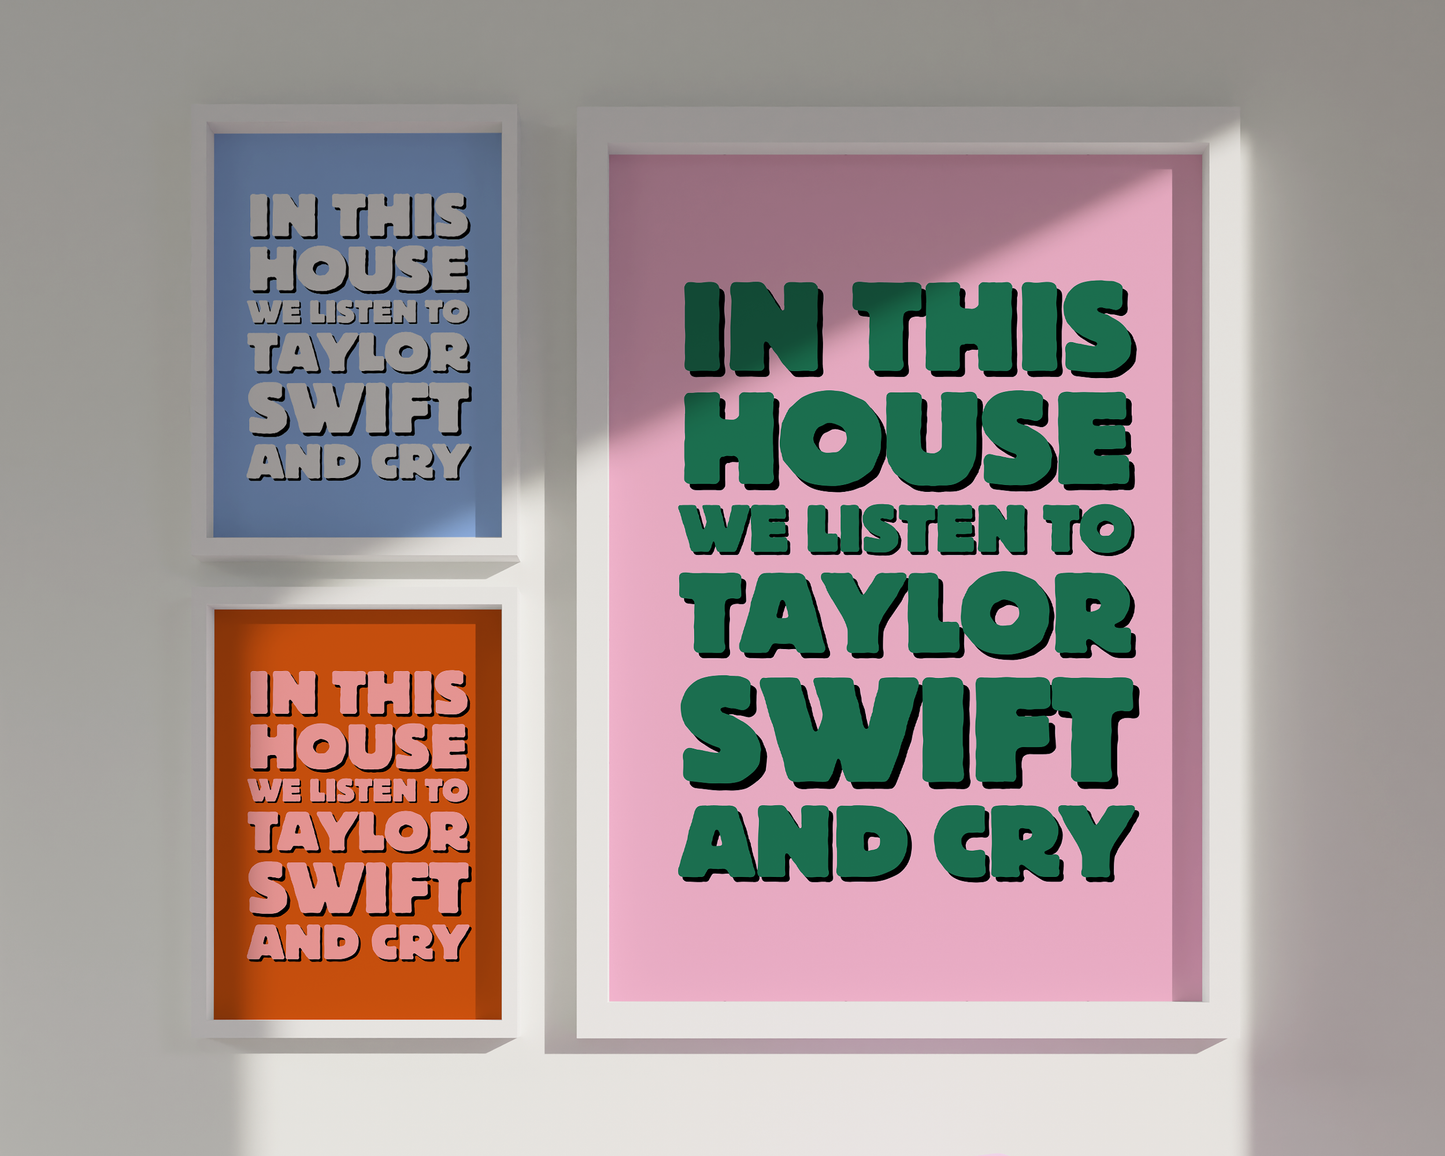 In This House we Listen to Taylor Swift and Cry Poster